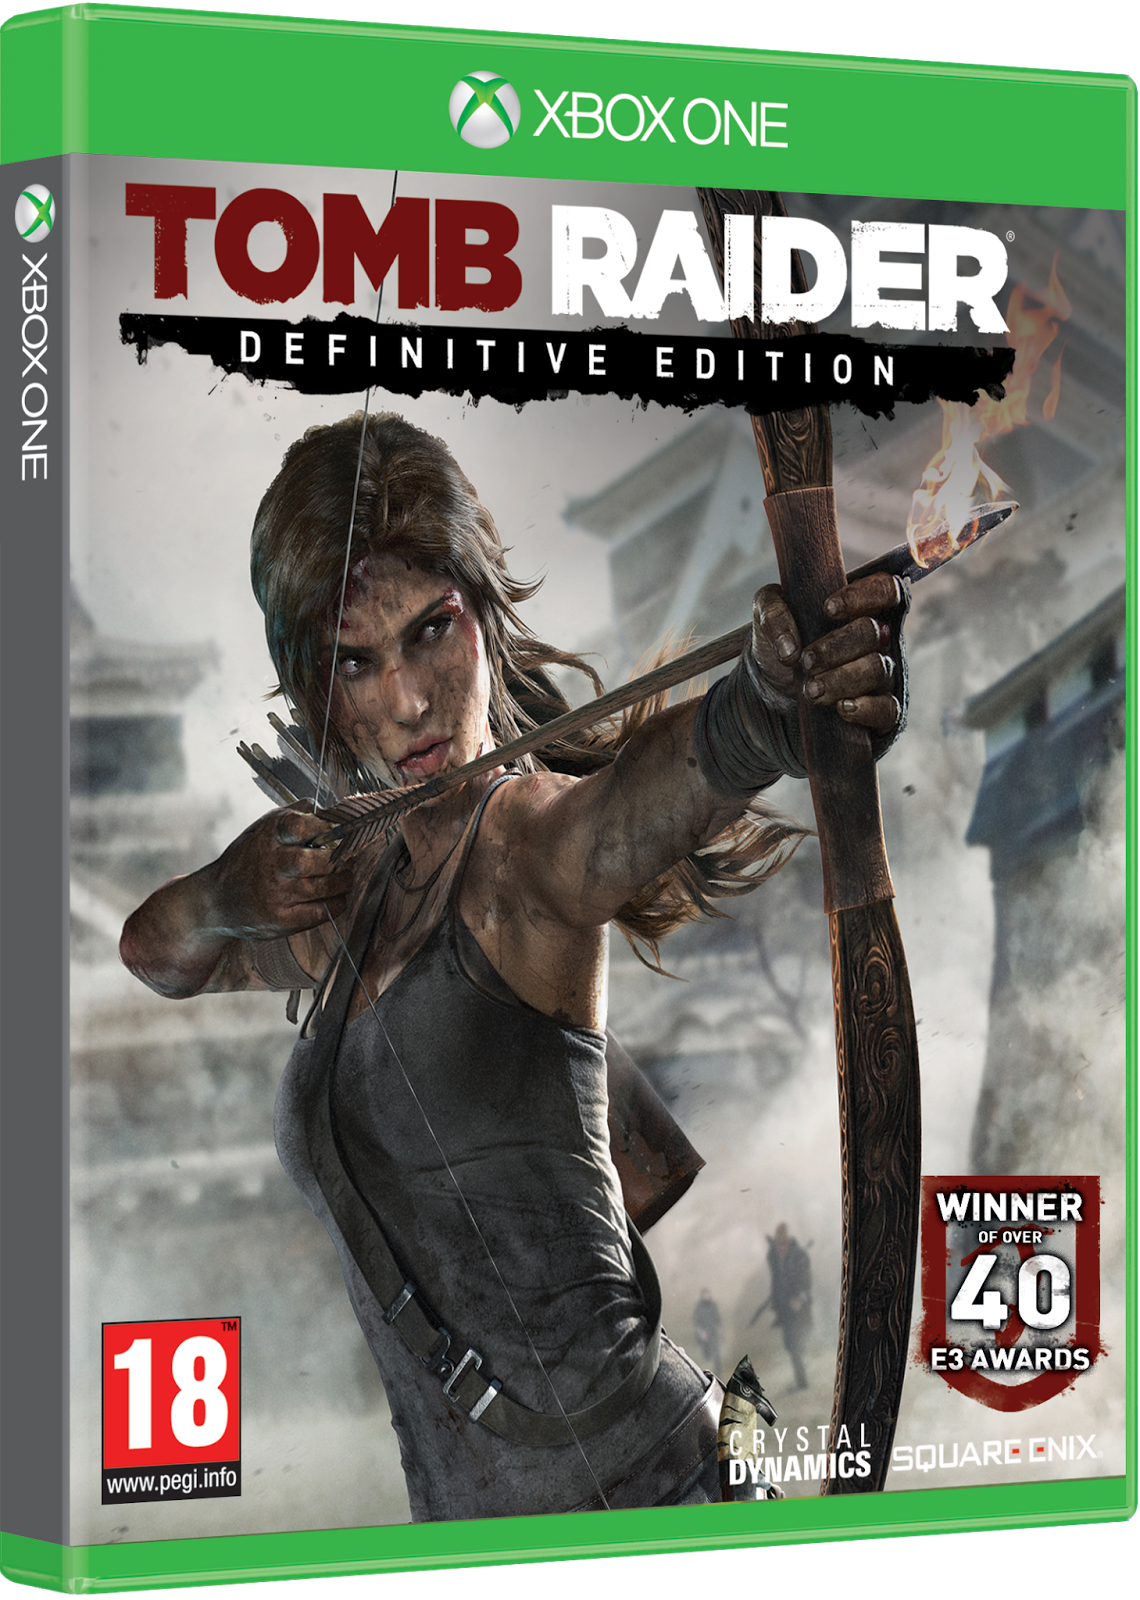 The Definitive Edition Of Tomb Raider Coming To PlayStation 4 and Xbox One - We Know ...